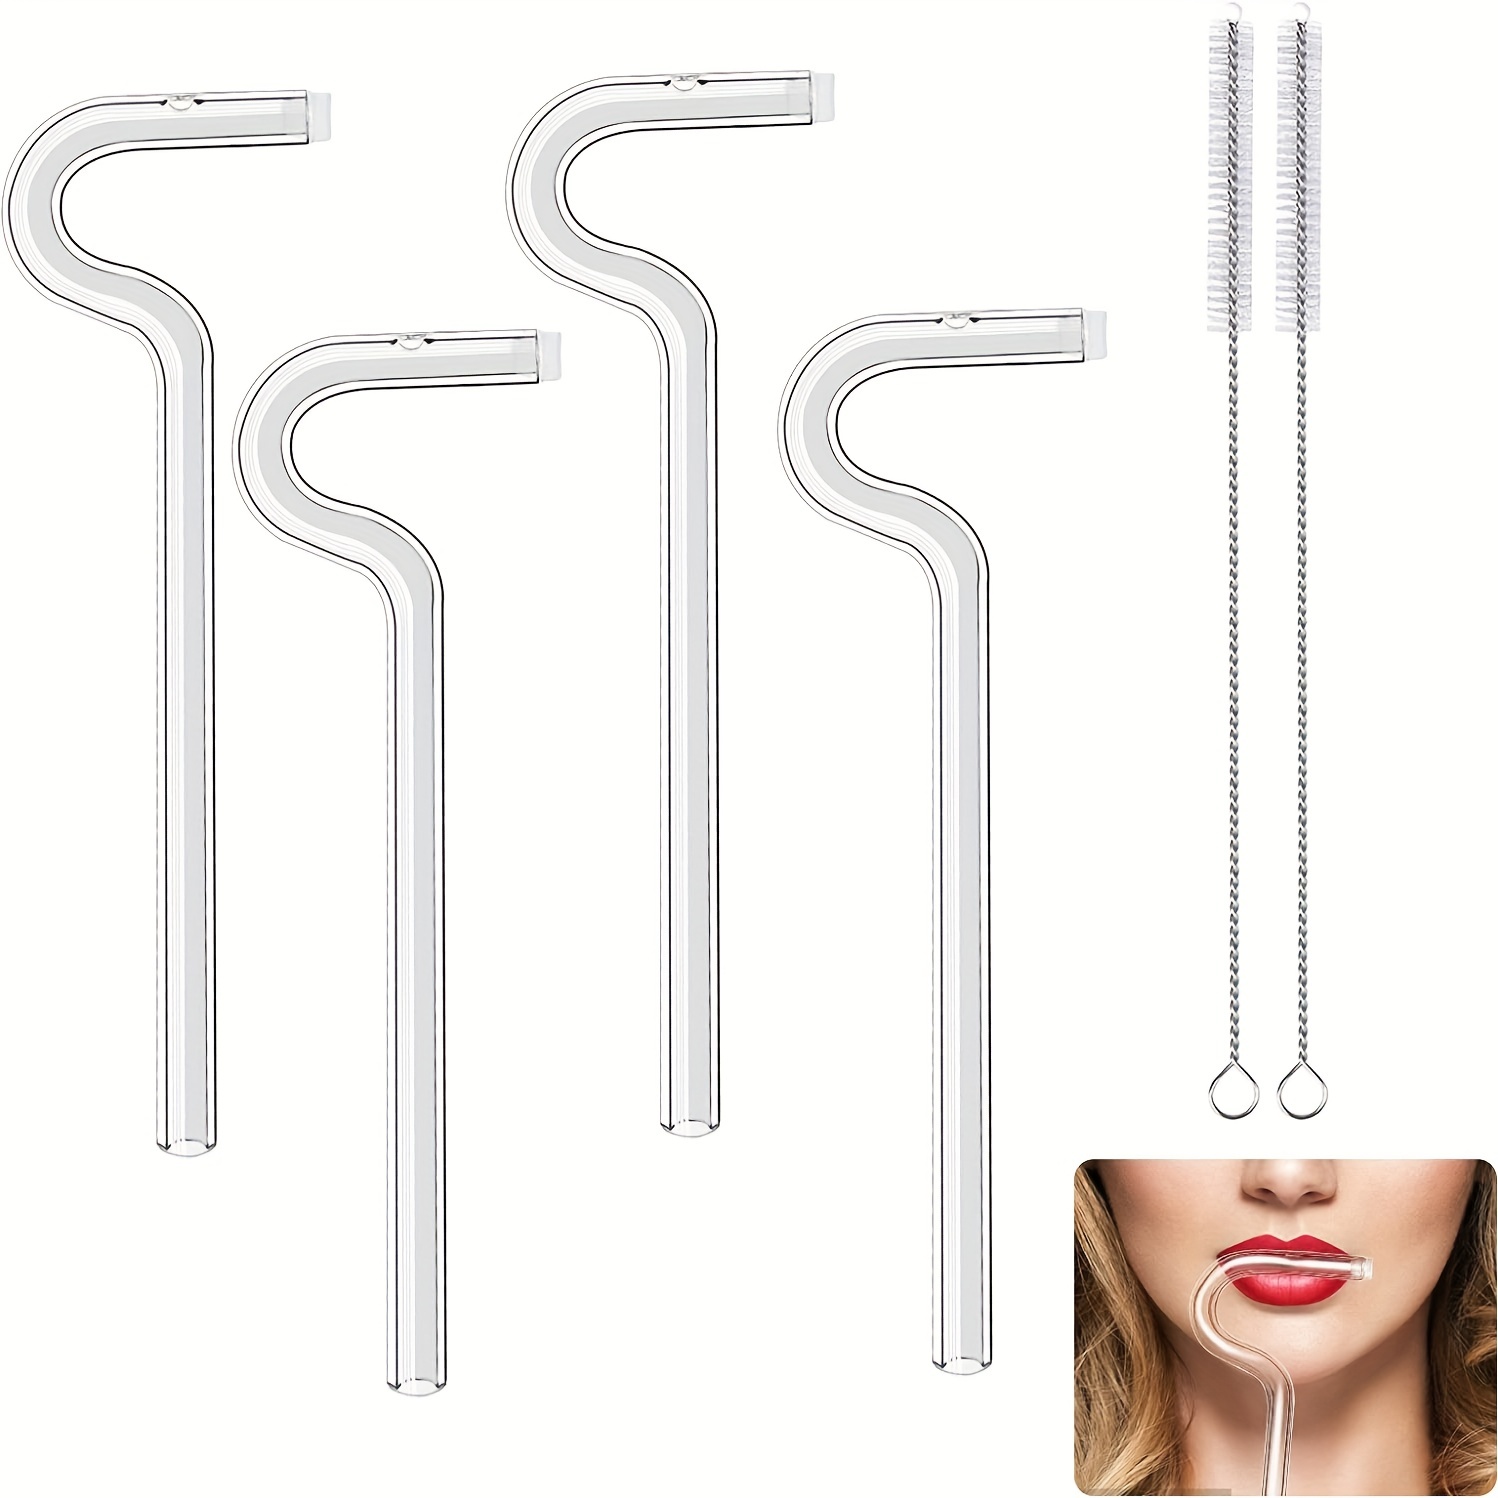 Anti Wrinkle Straw 2pcs, Reusable Glass Straw for Stanley Cup